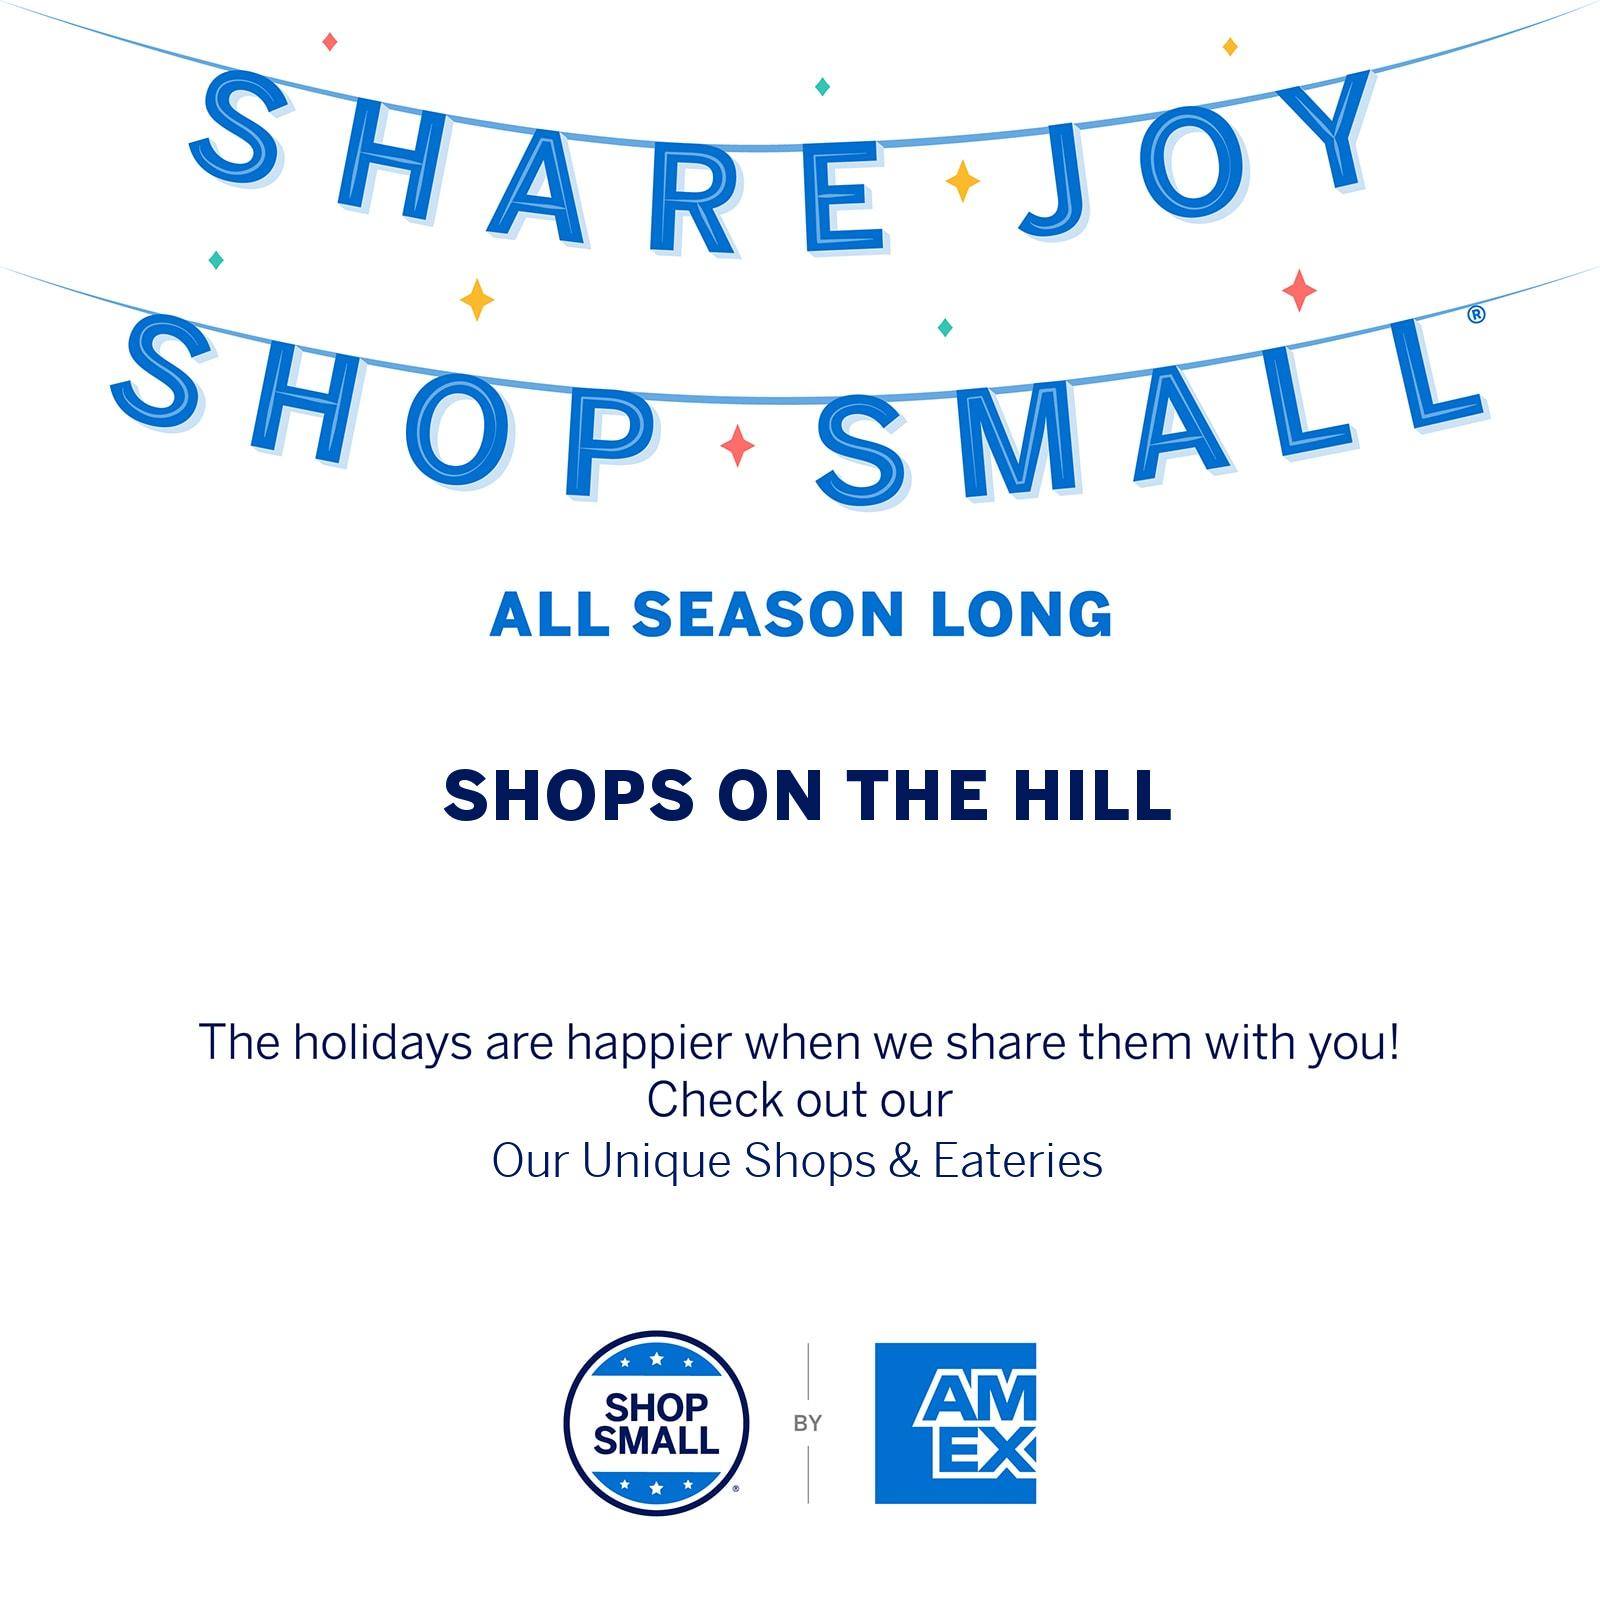 Shop Small Saturday on the HIll